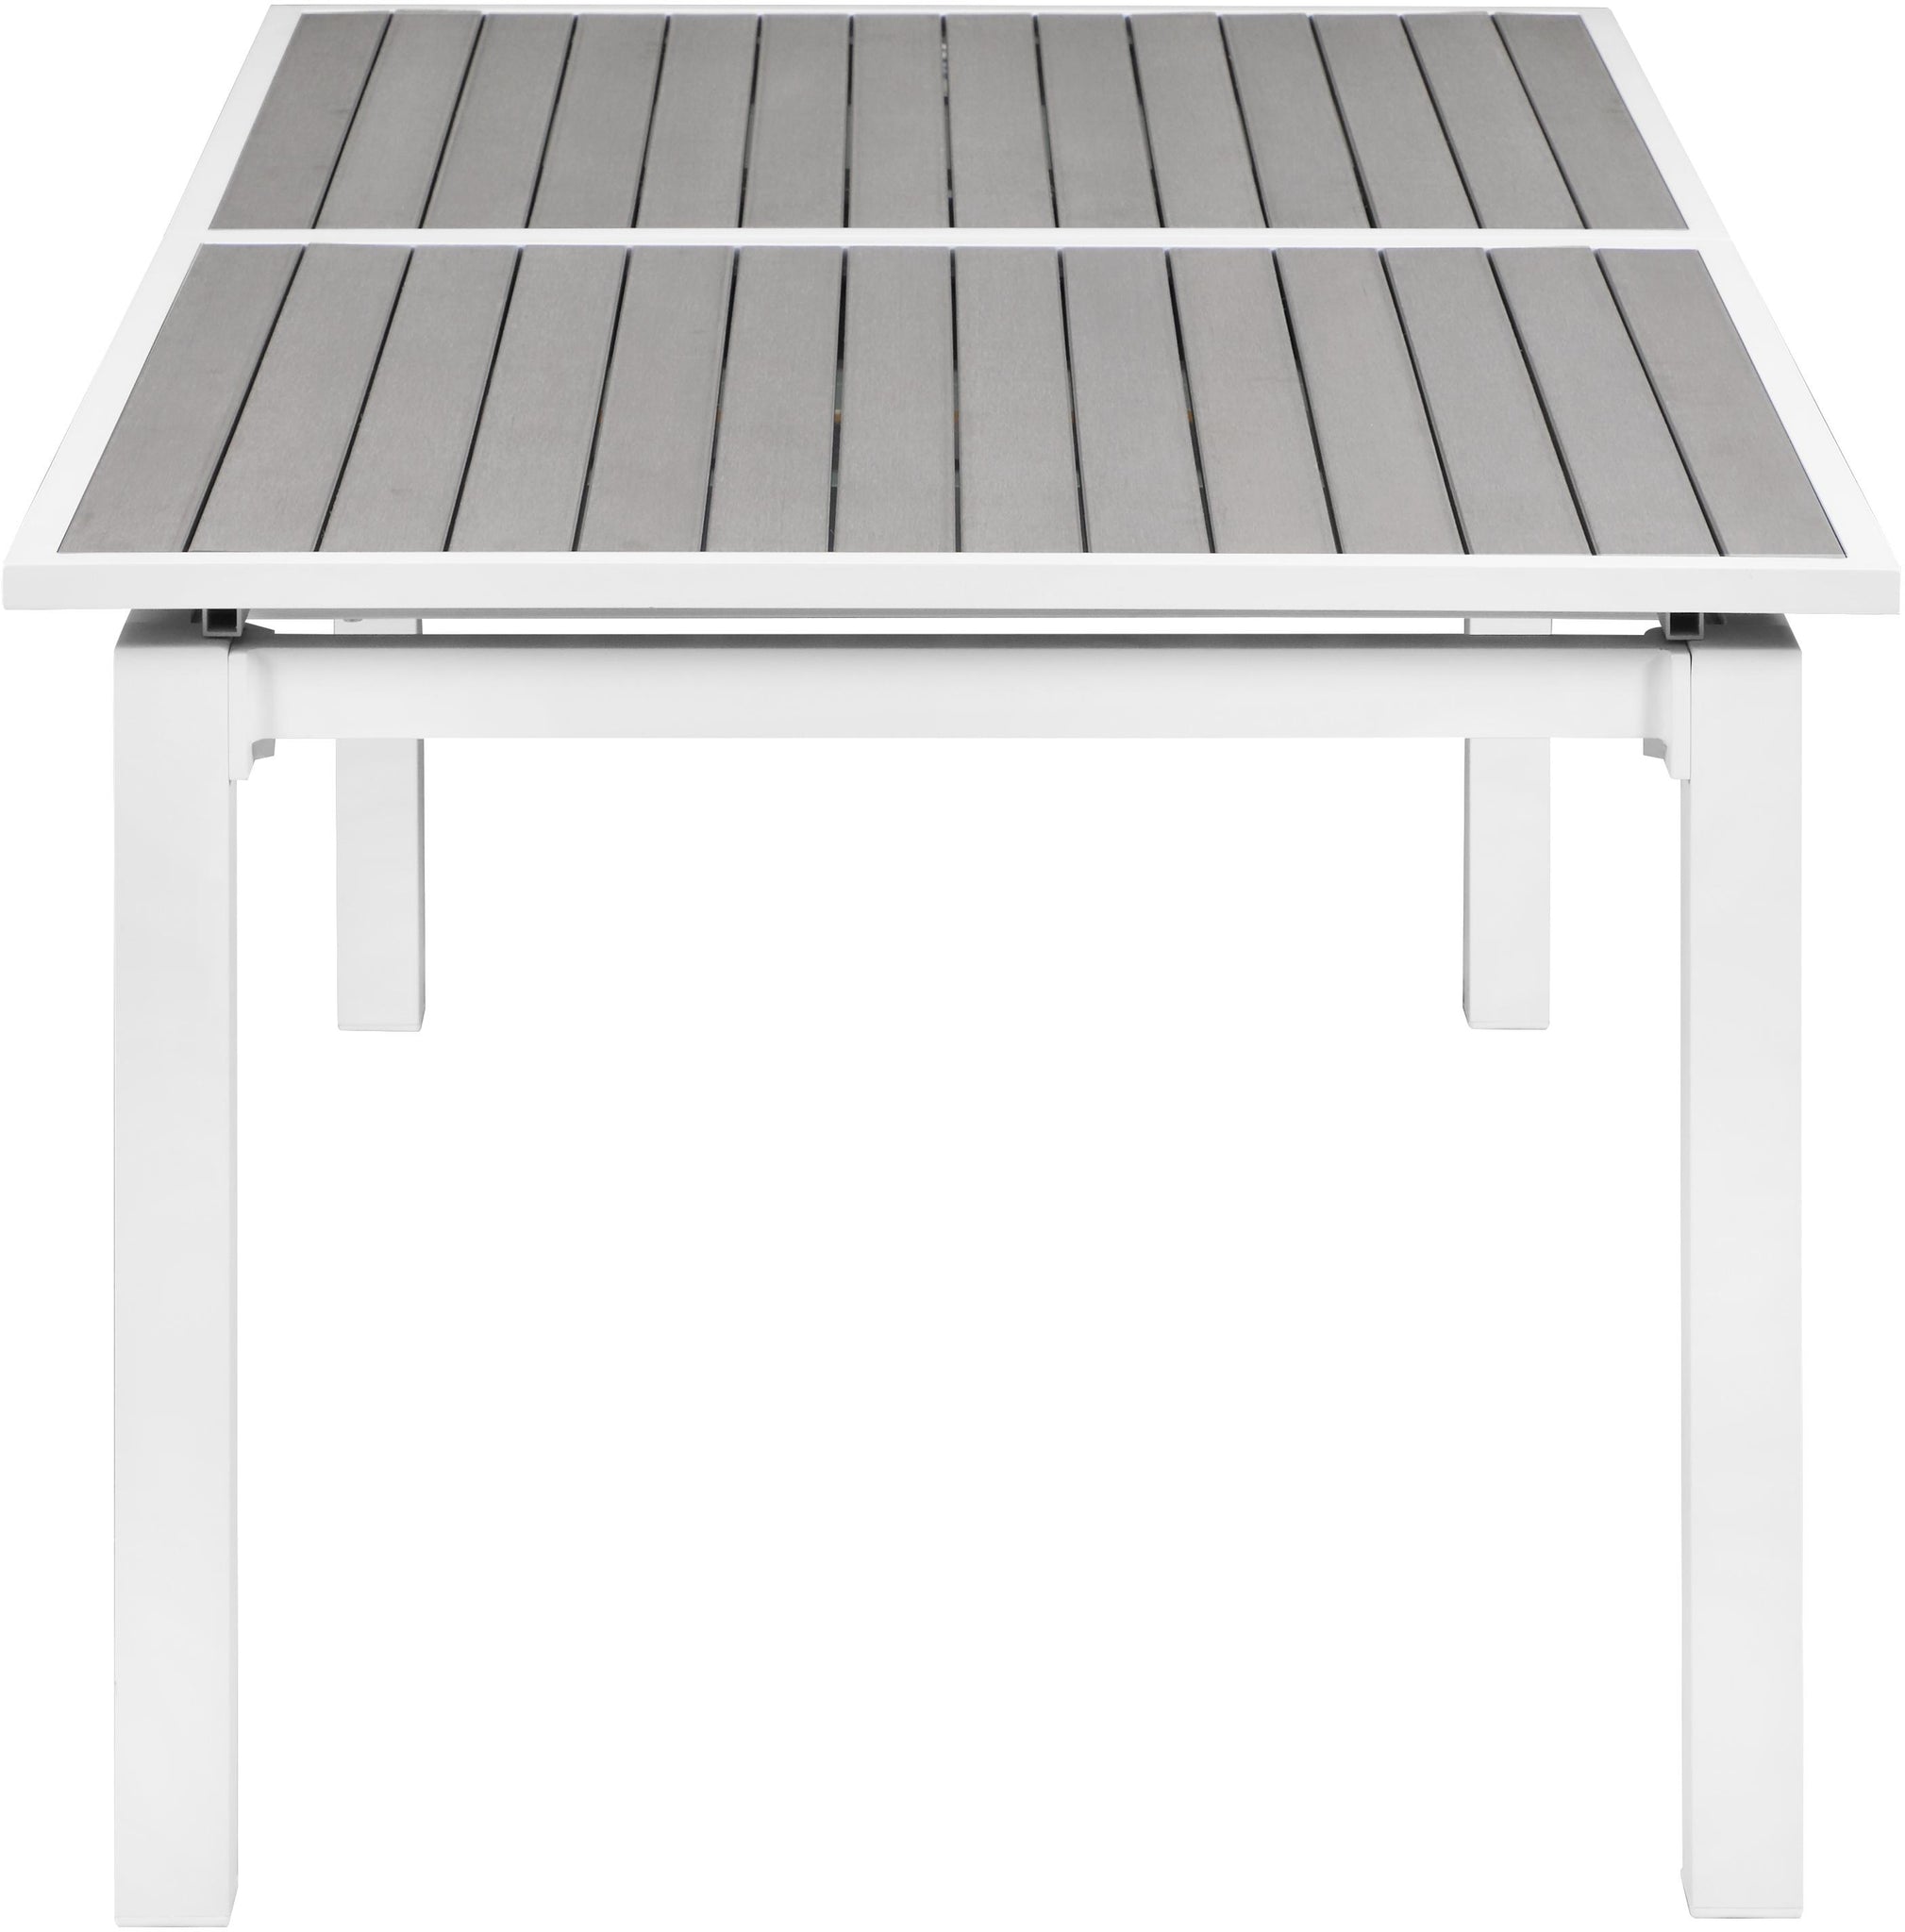 Nizuc Grey manufactured wood Outdoor Patio Extendable Aluminum Dining Table